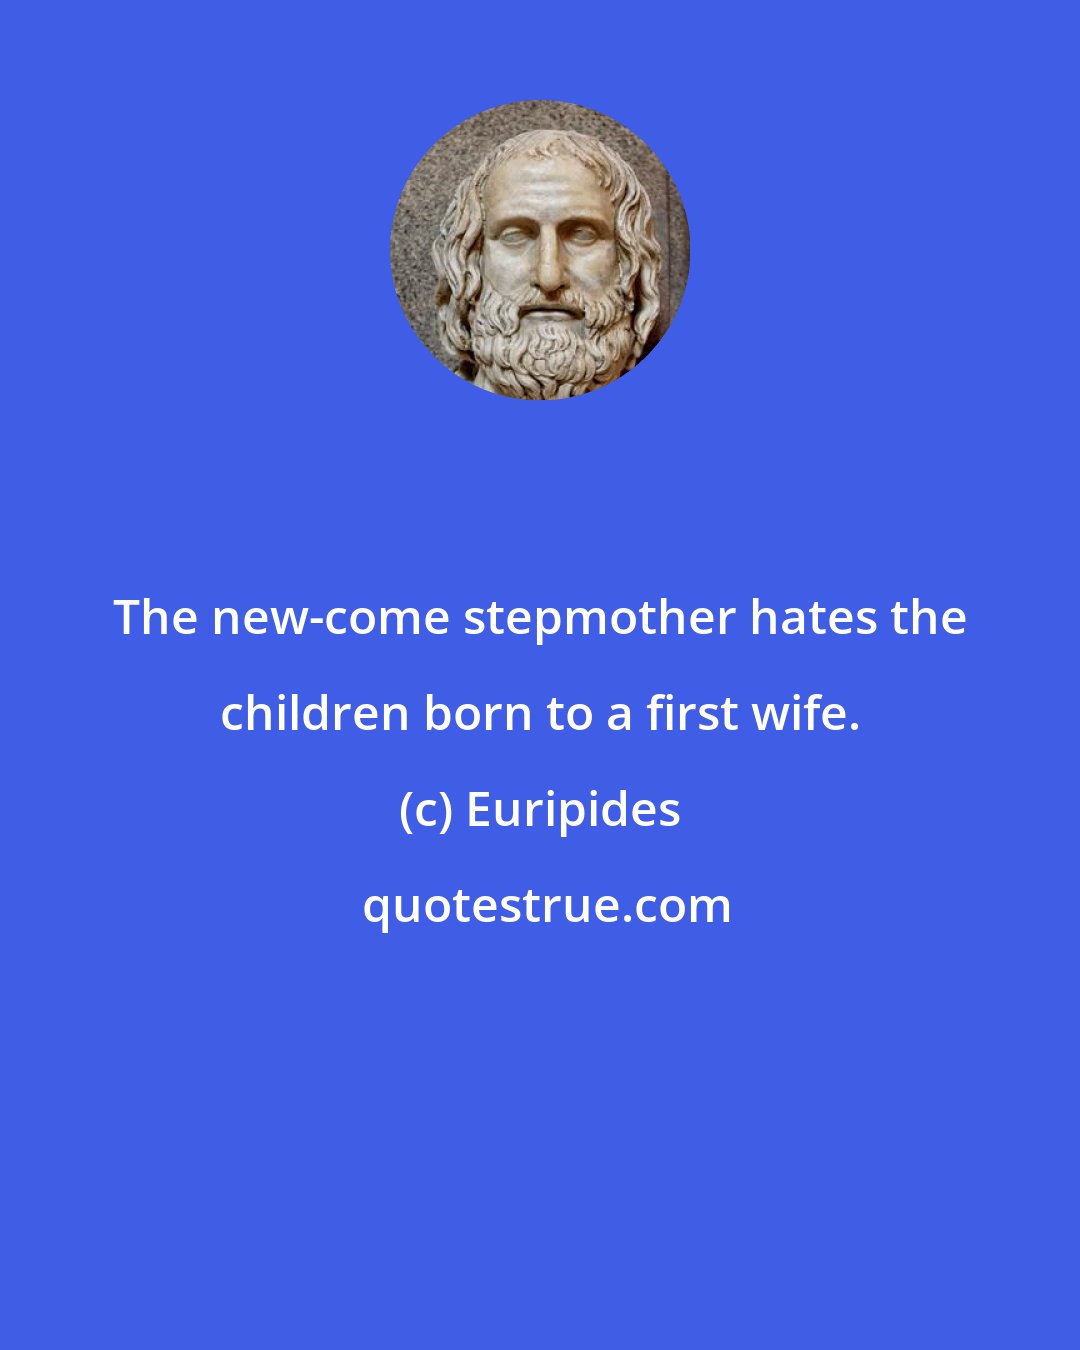 Euripides: The new-come stepmother hates the children born to a first wife.